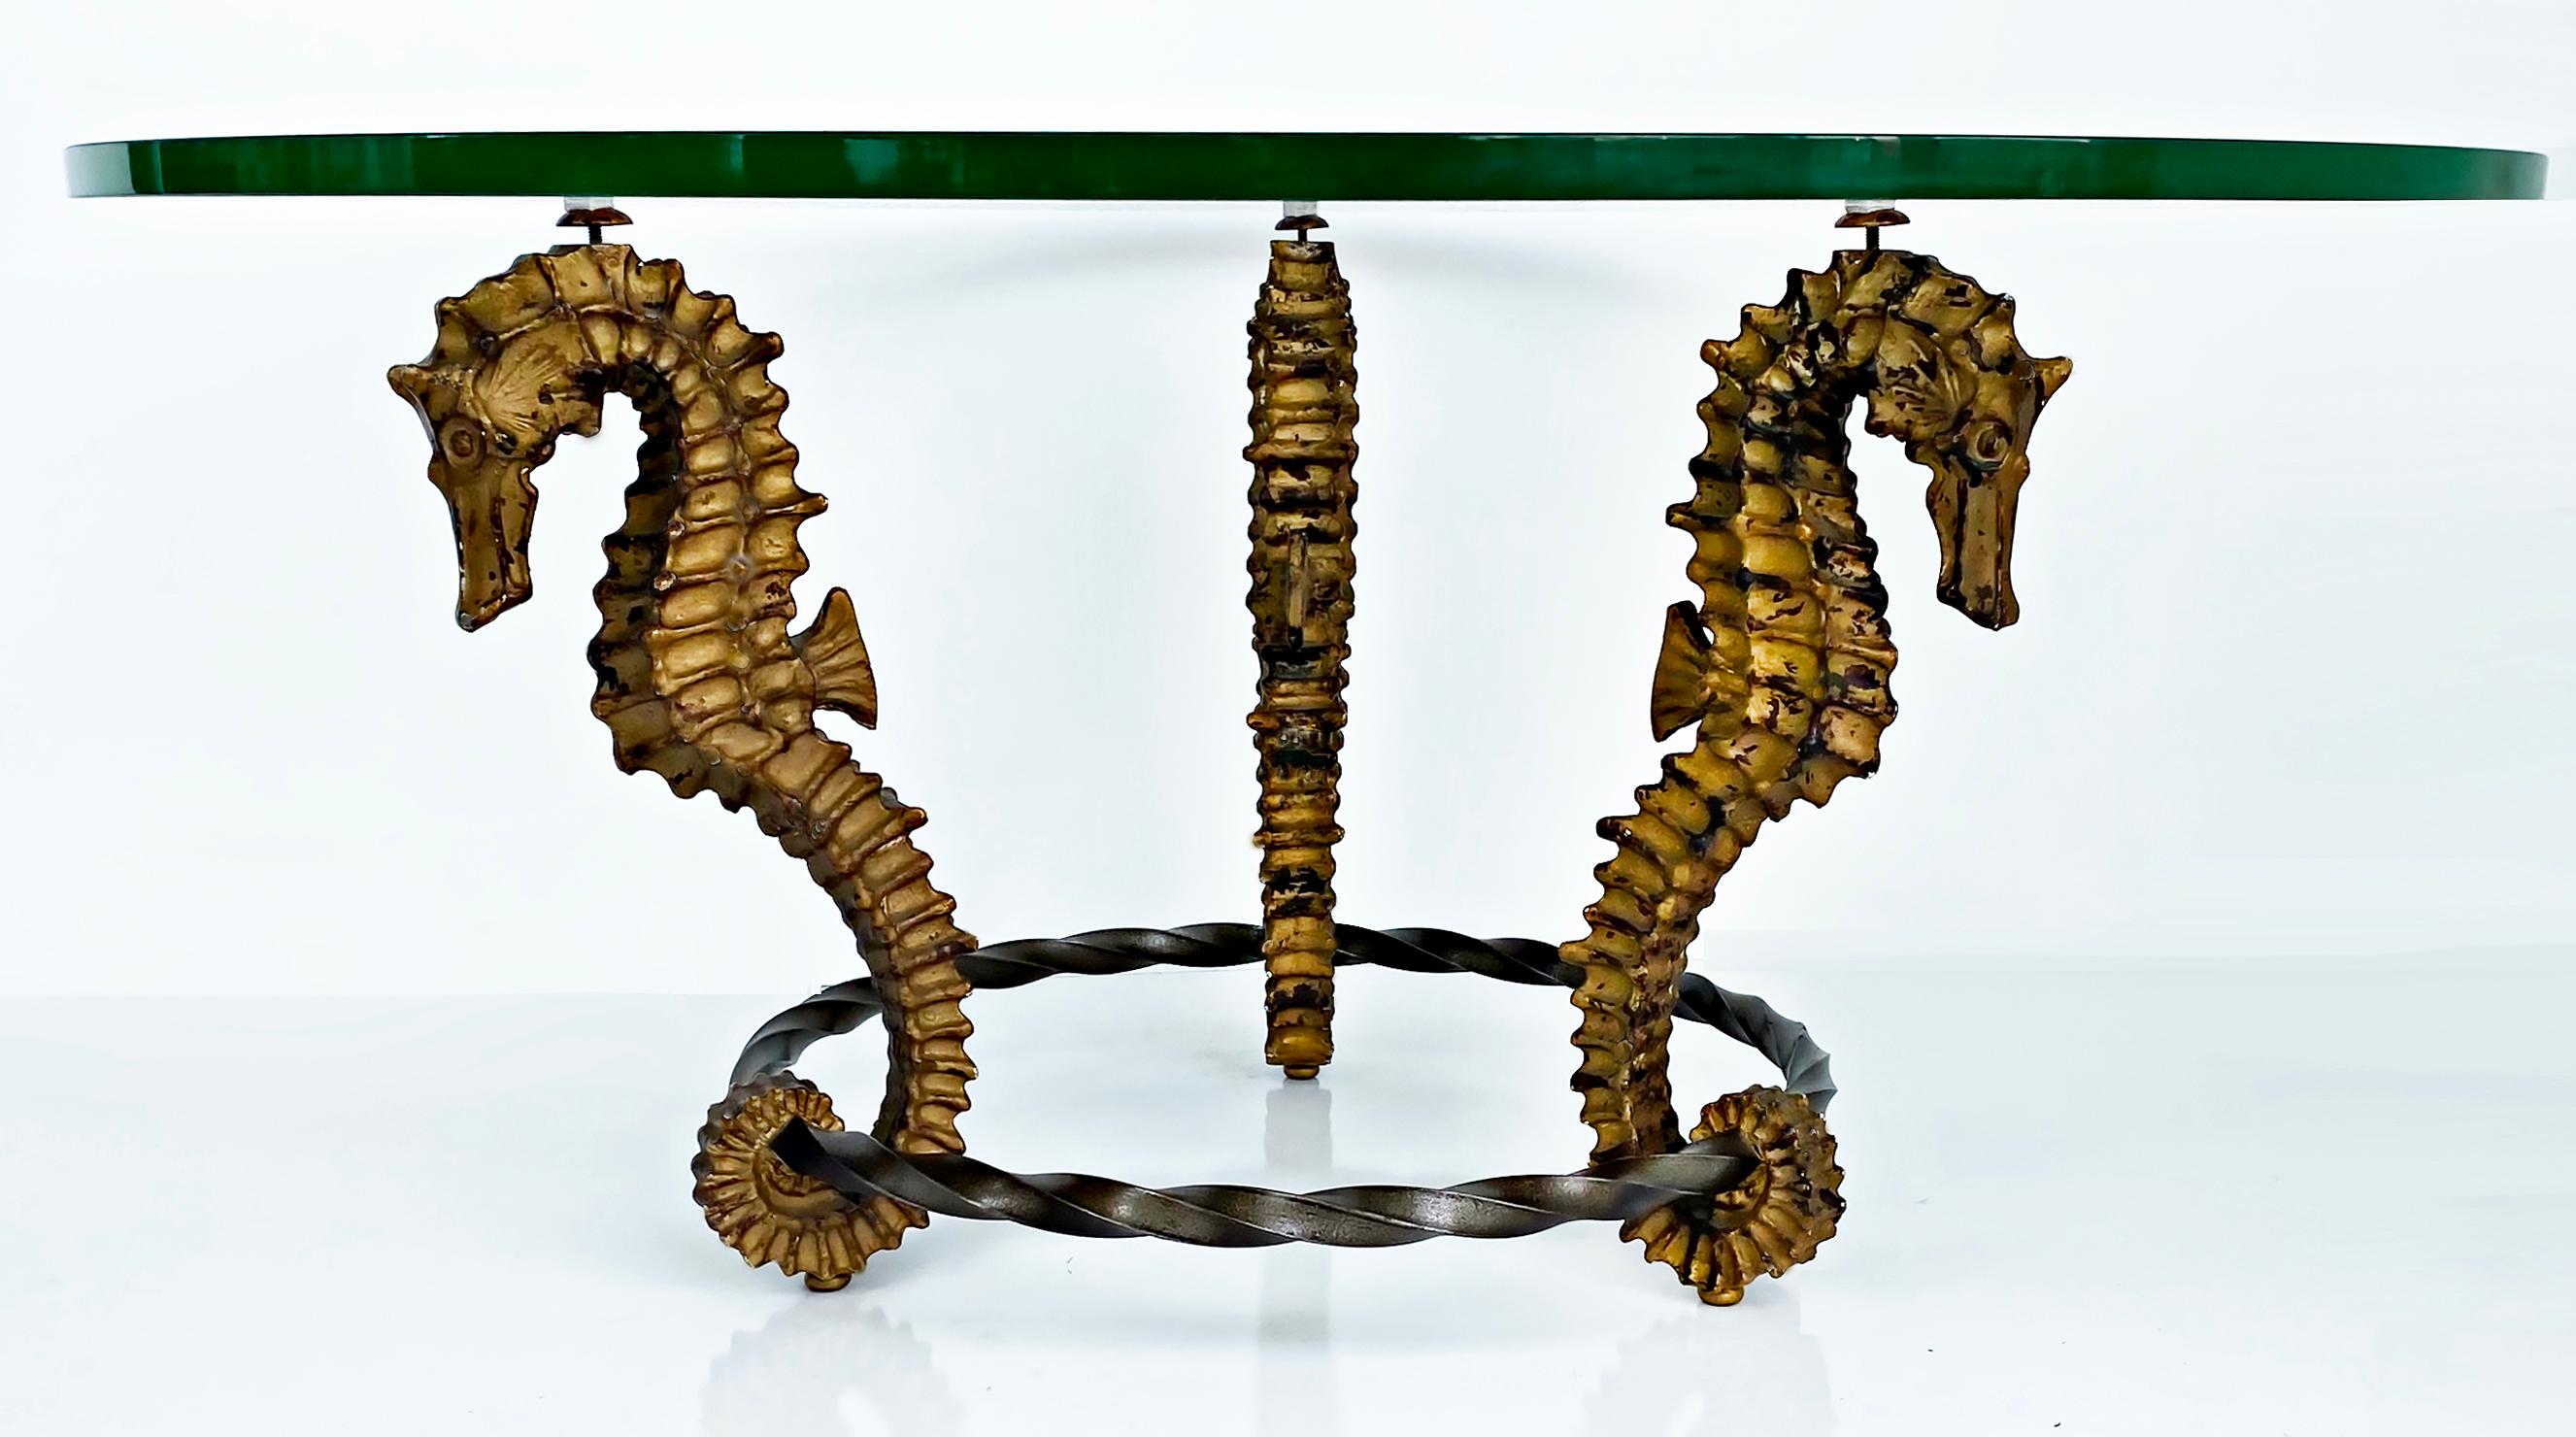 Gilt seahorse coffee table with thick round glass top, iron and metal

Offered for sale is a circa 1970s modern coffee table supported by three gilt metal seahorses connected by a twisted iron ring at the base. The seahorses support a thick round